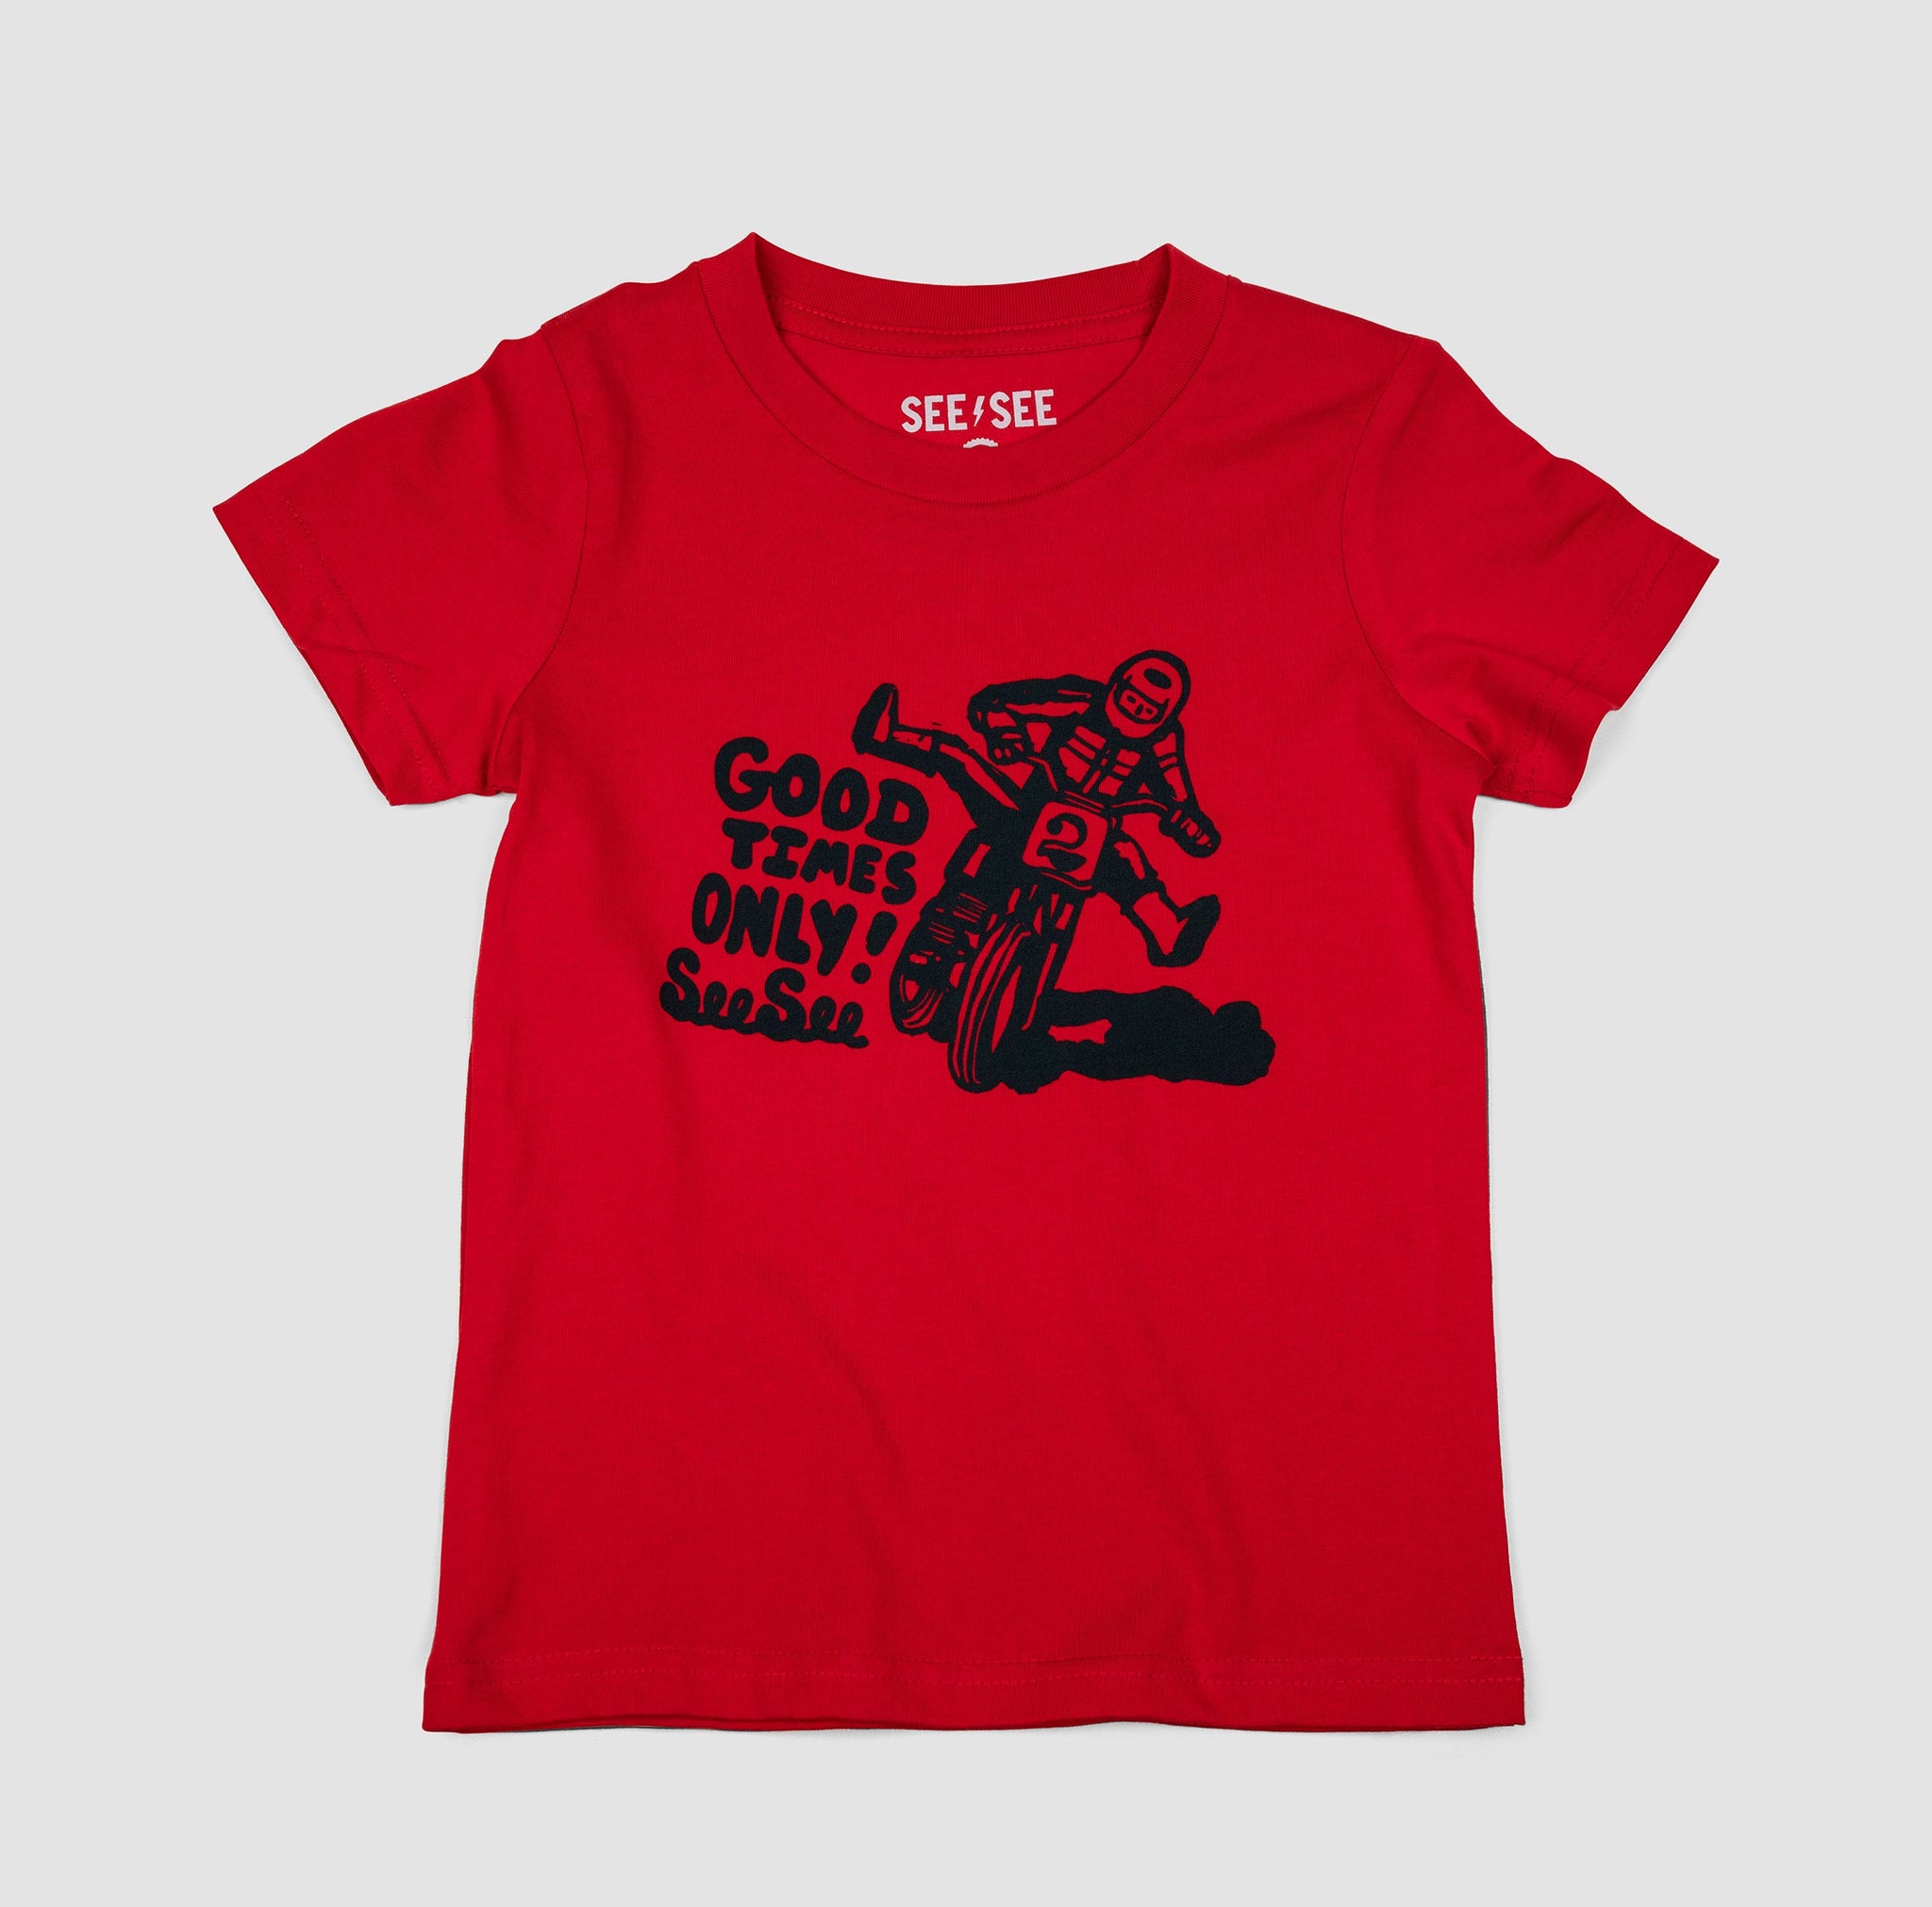 Front shot of primary red children's unisex t-shirt with black illustration of a motorcyclist. Text to the left of the motorist reads, Good times only! See See.